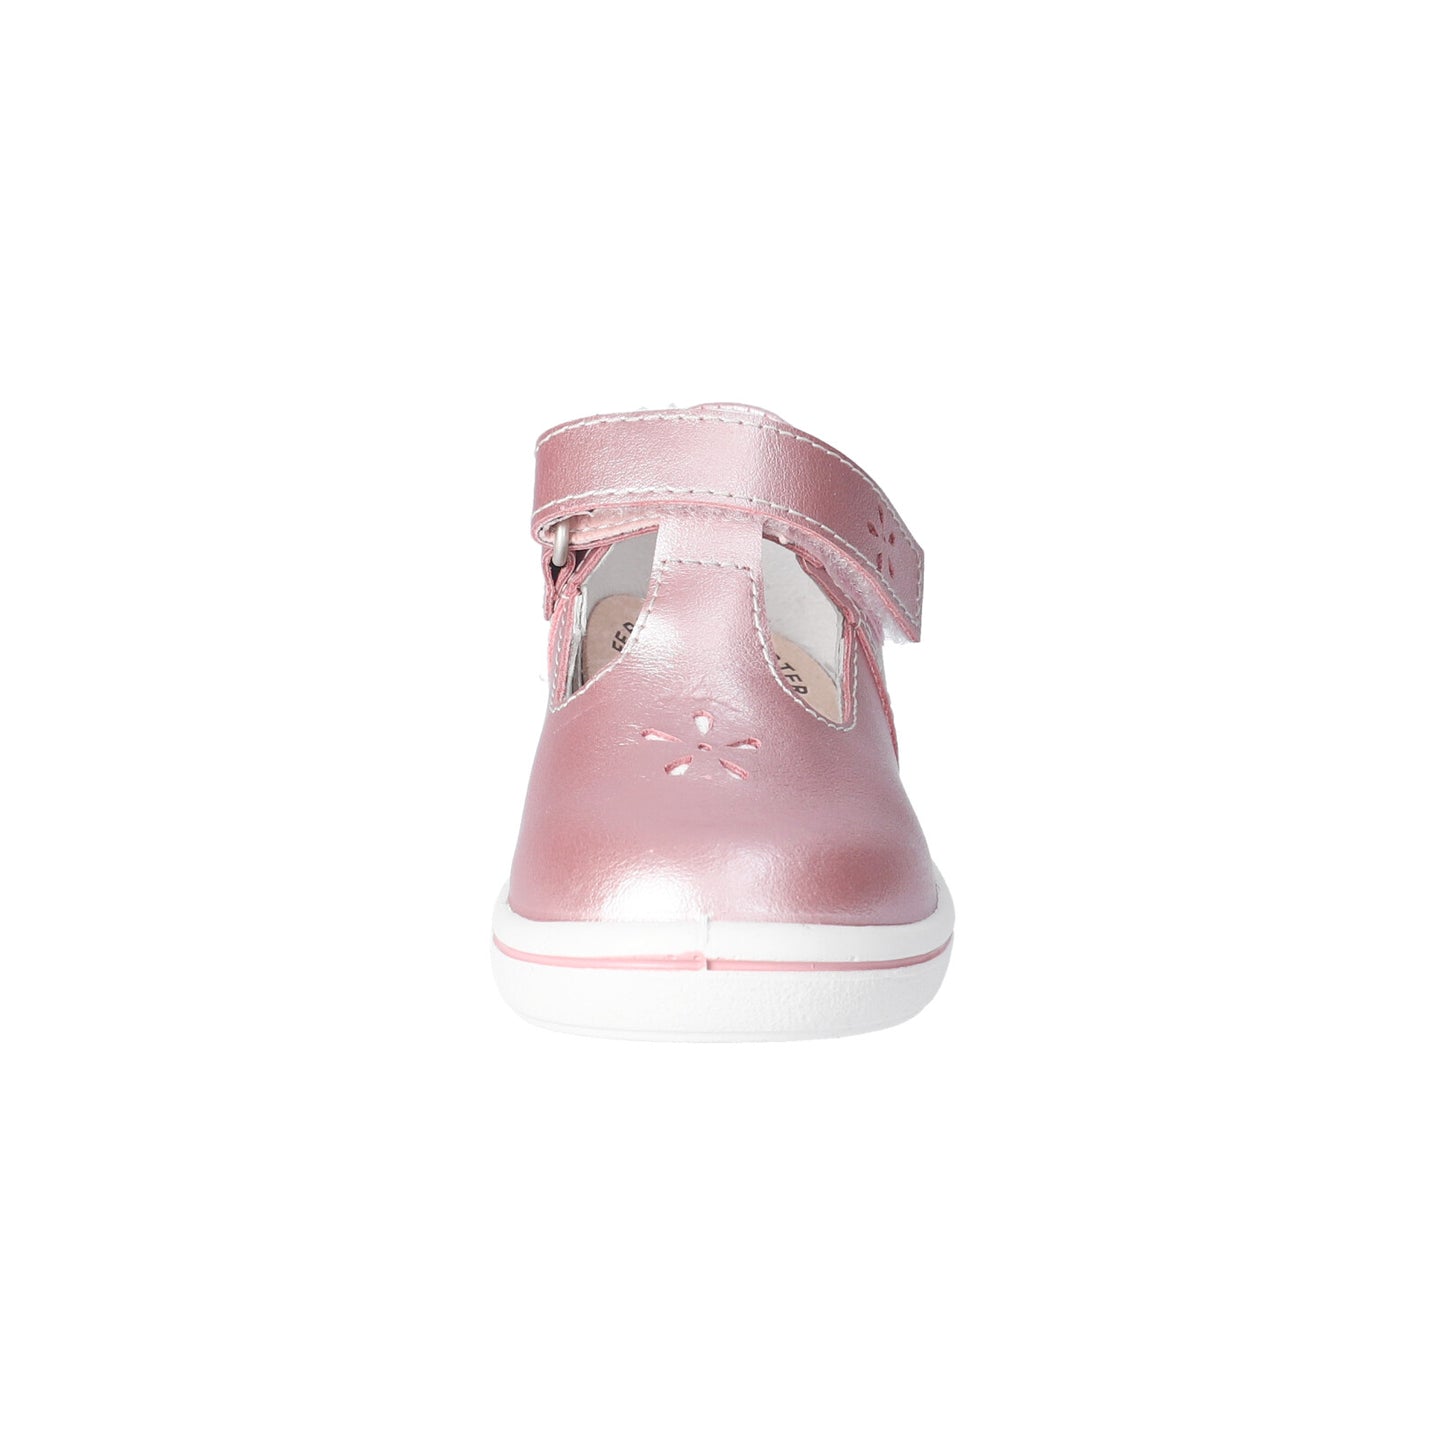 Winona Girl's T-Bar Shoe in Pearl Pink